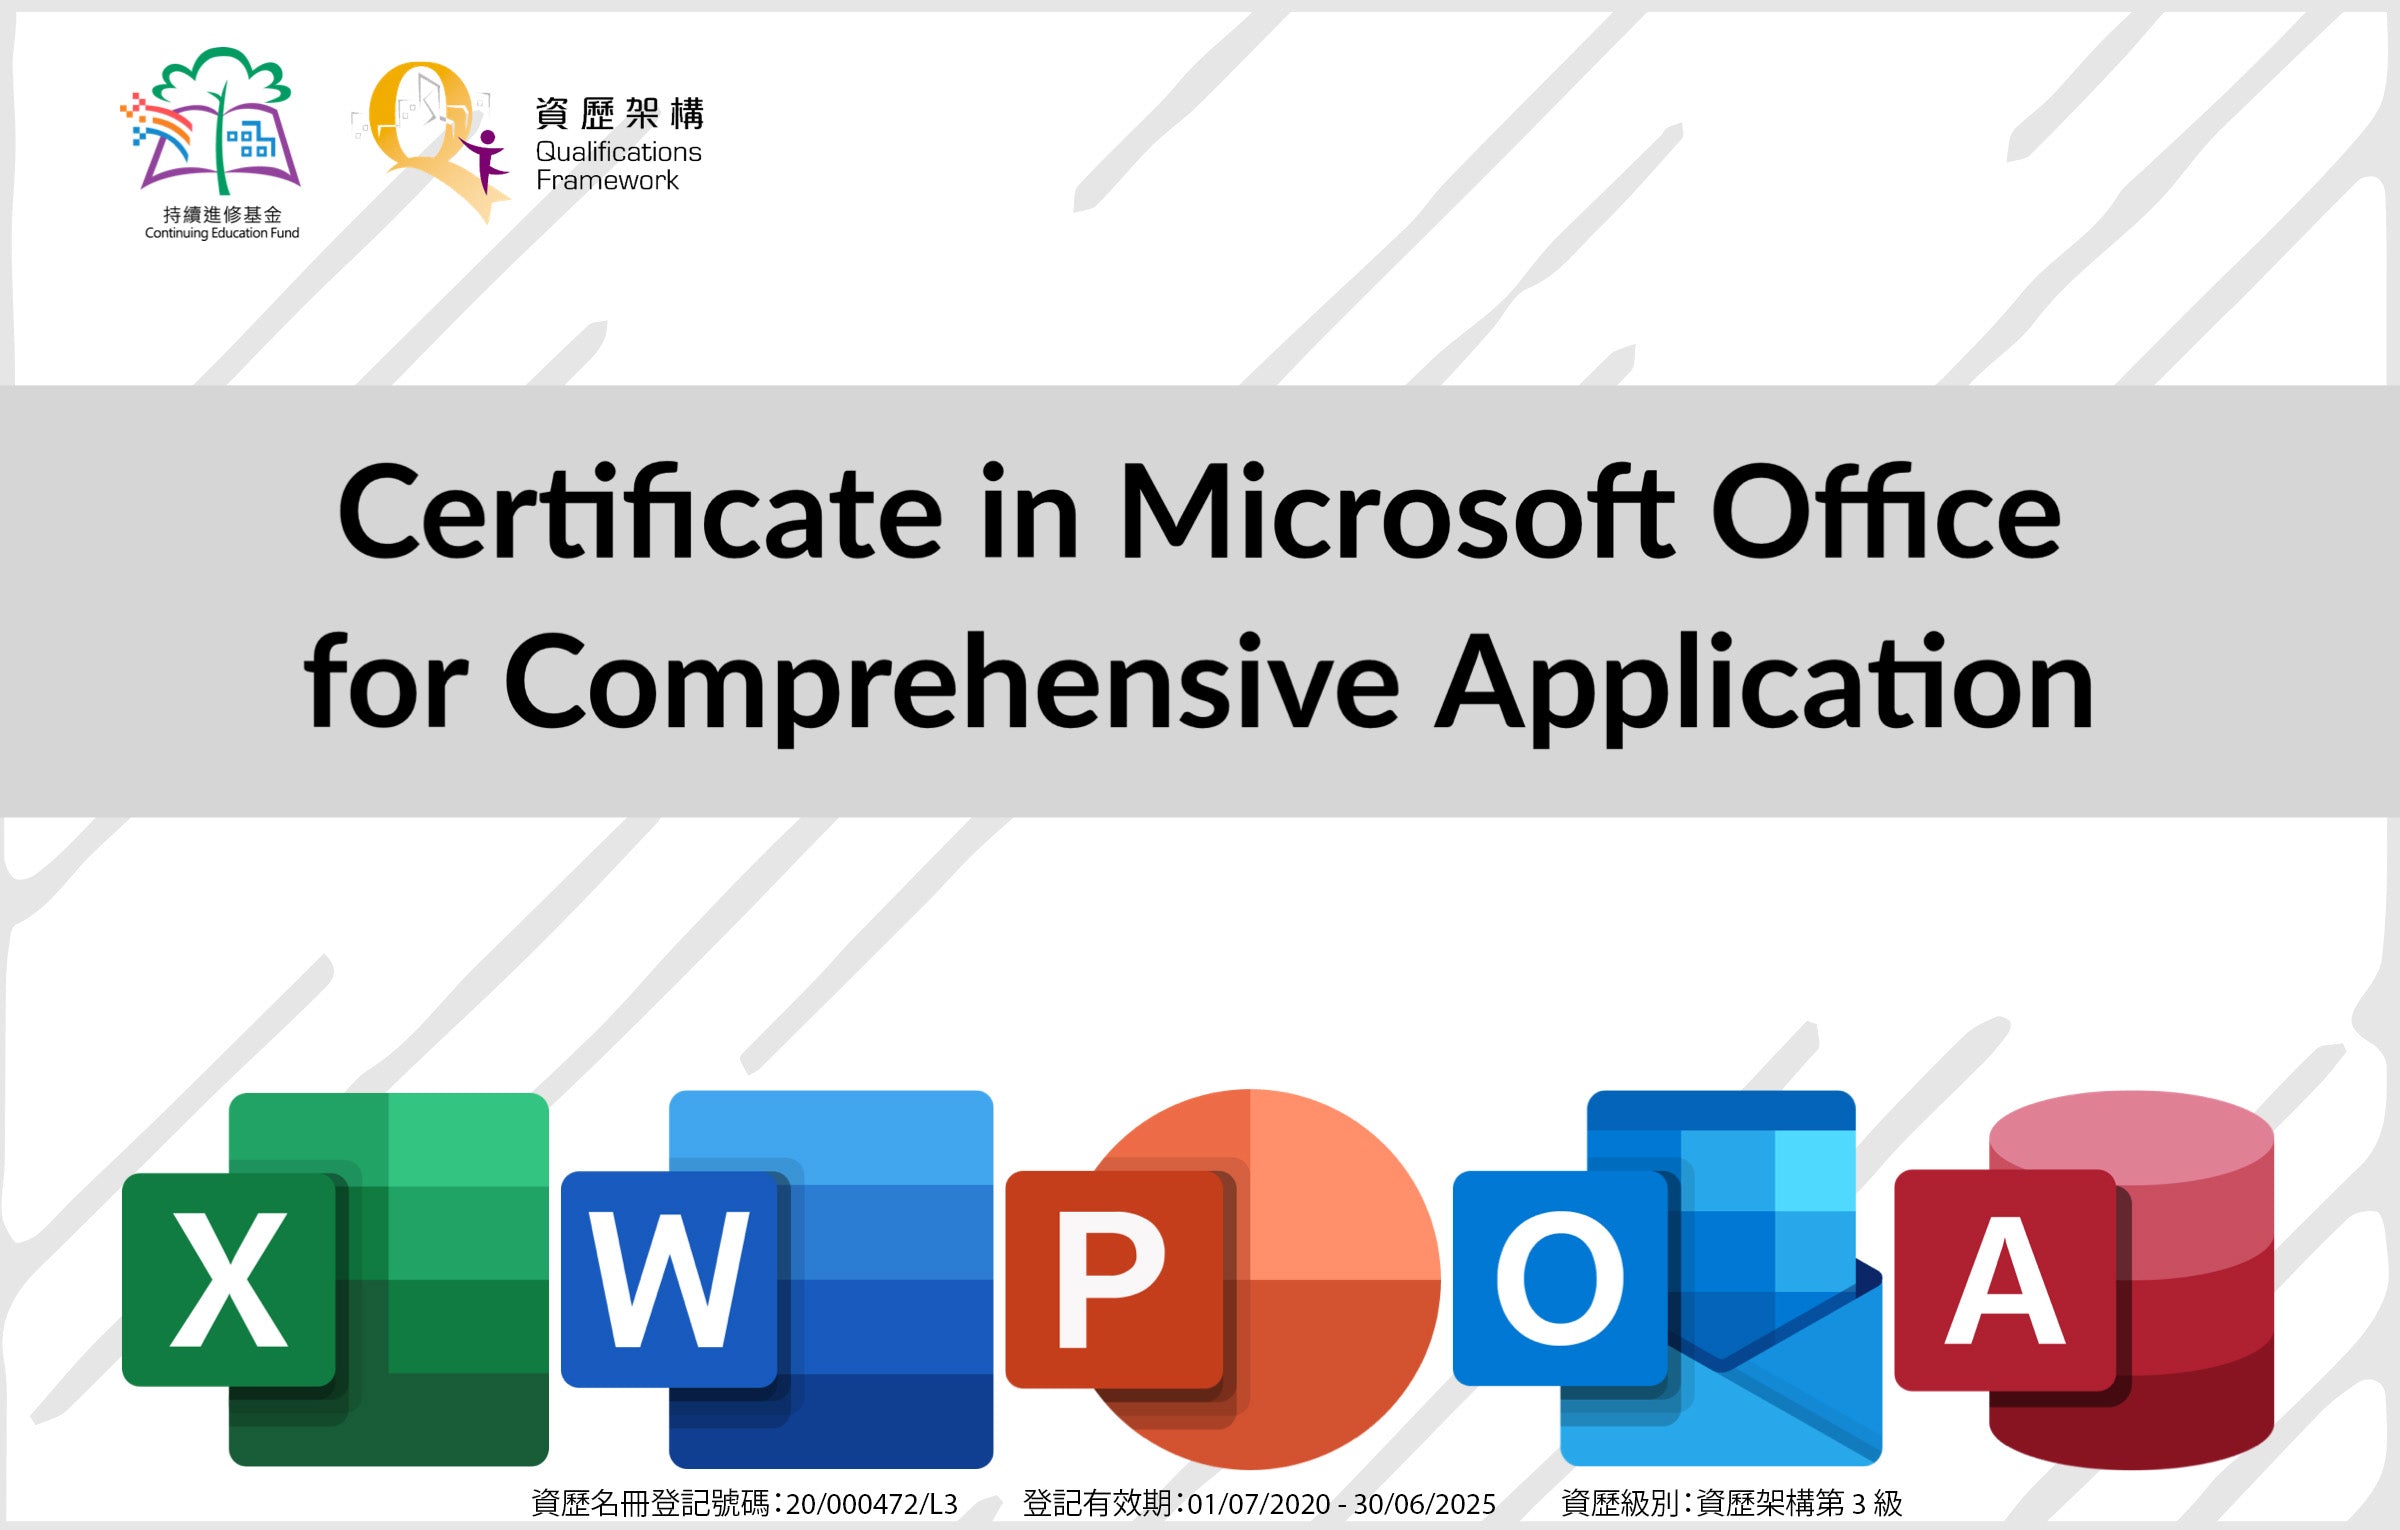 Certificate in Microsoft Office for Comprehensive Application - 5 月份 （快將截止，立即報名！)